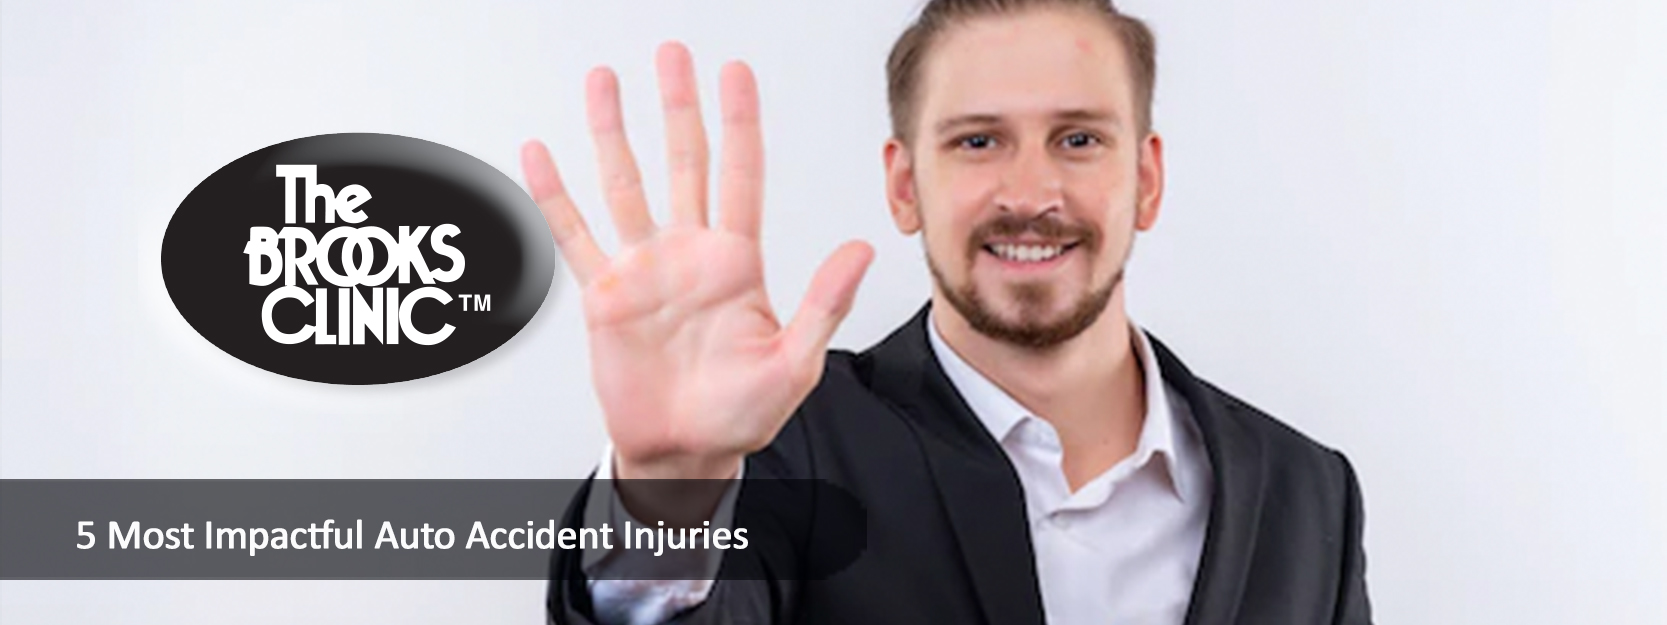 5 Most Impactful Auto Injuries To Watch Out For & What To Do